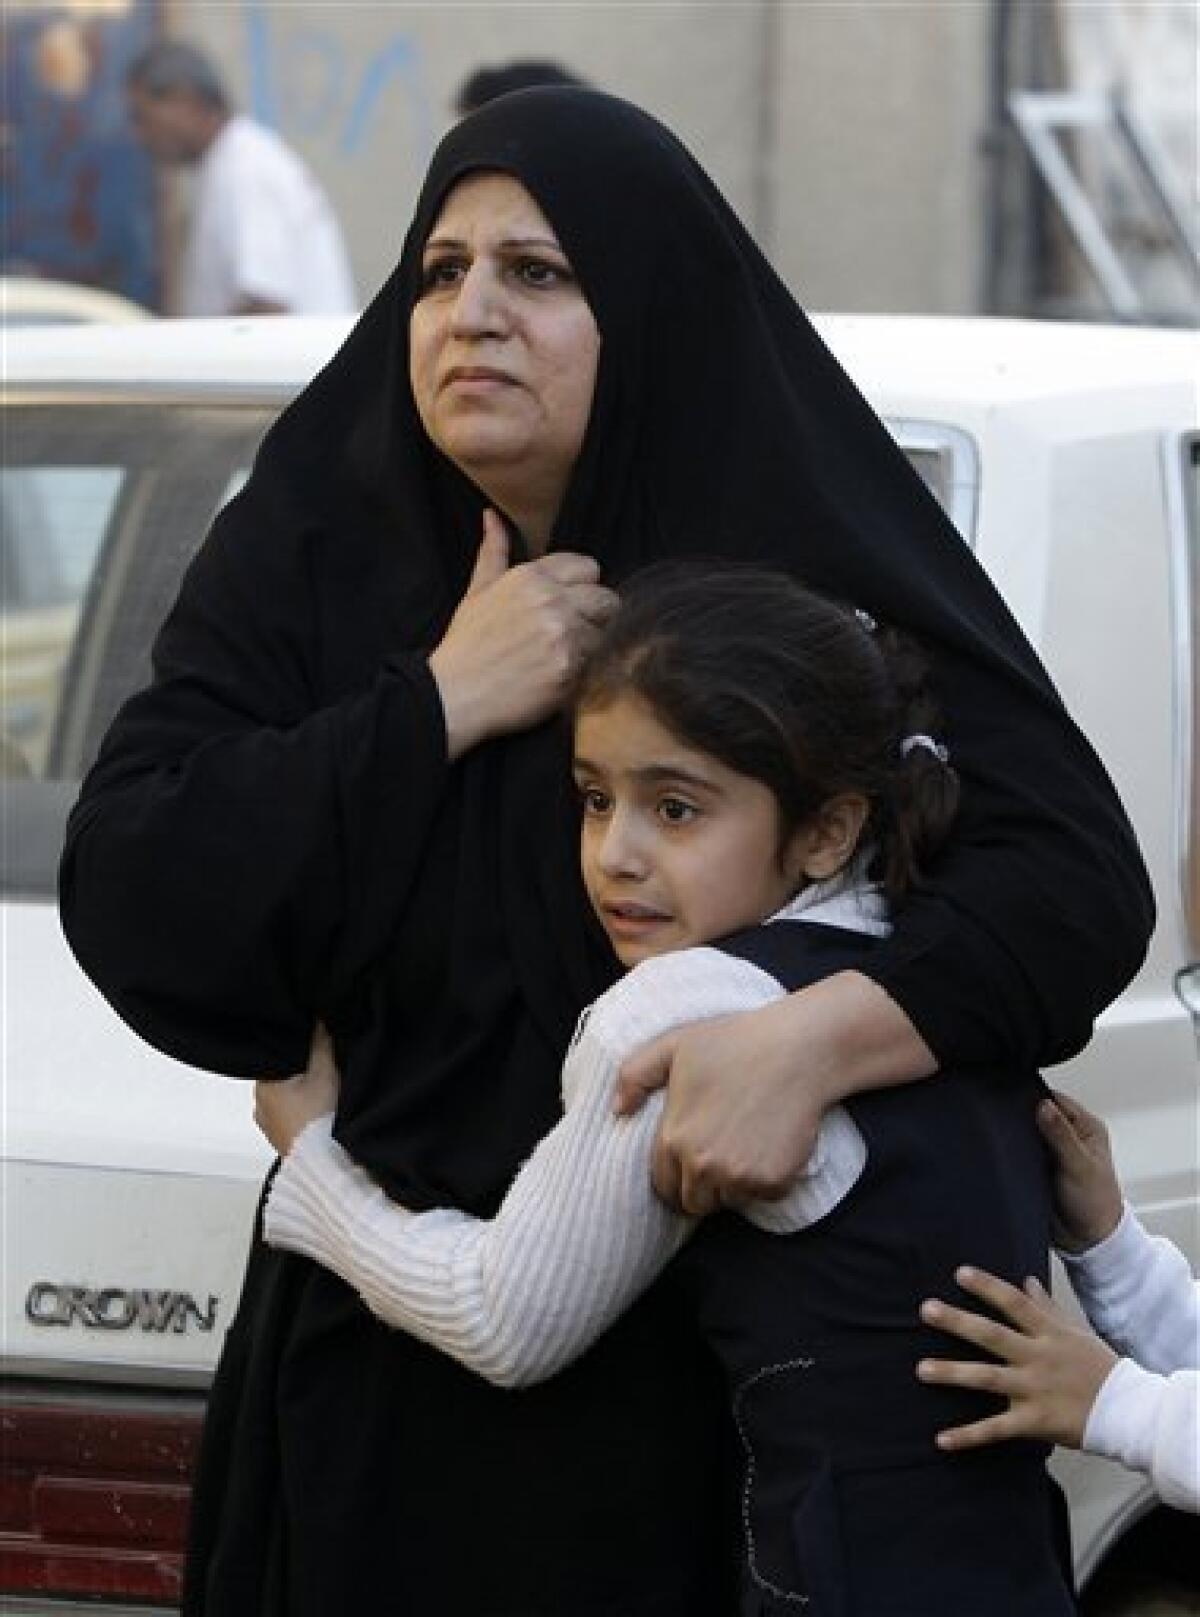 An Iraqi women hugs her daughter at the site of a car bomb attack in Baghdad, Iraq, Tuesday, Dec. 15, 2009. A series of car bombs ripped through downtown Baghdad near the heavily fortified Green Zone. (AP Photo/Hadi Mizban)